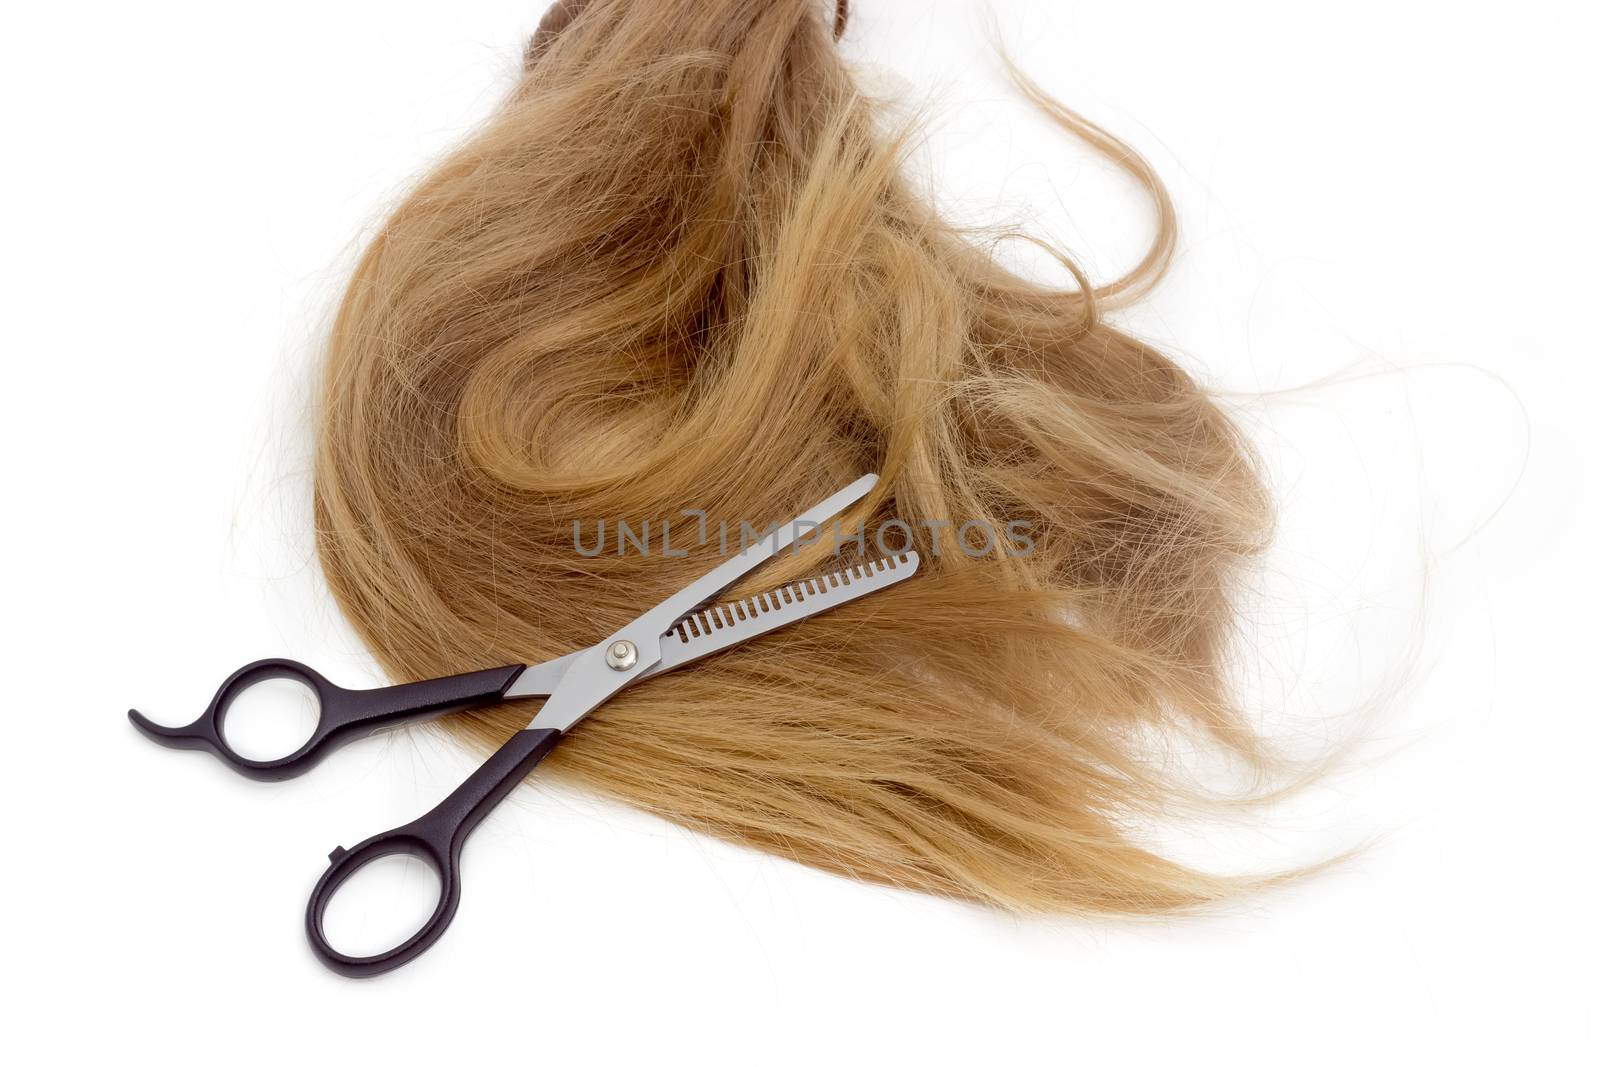 Specialized type of hairdressers scissors - thinning shears  against the backdrop of strand of female hair on a light background. 
